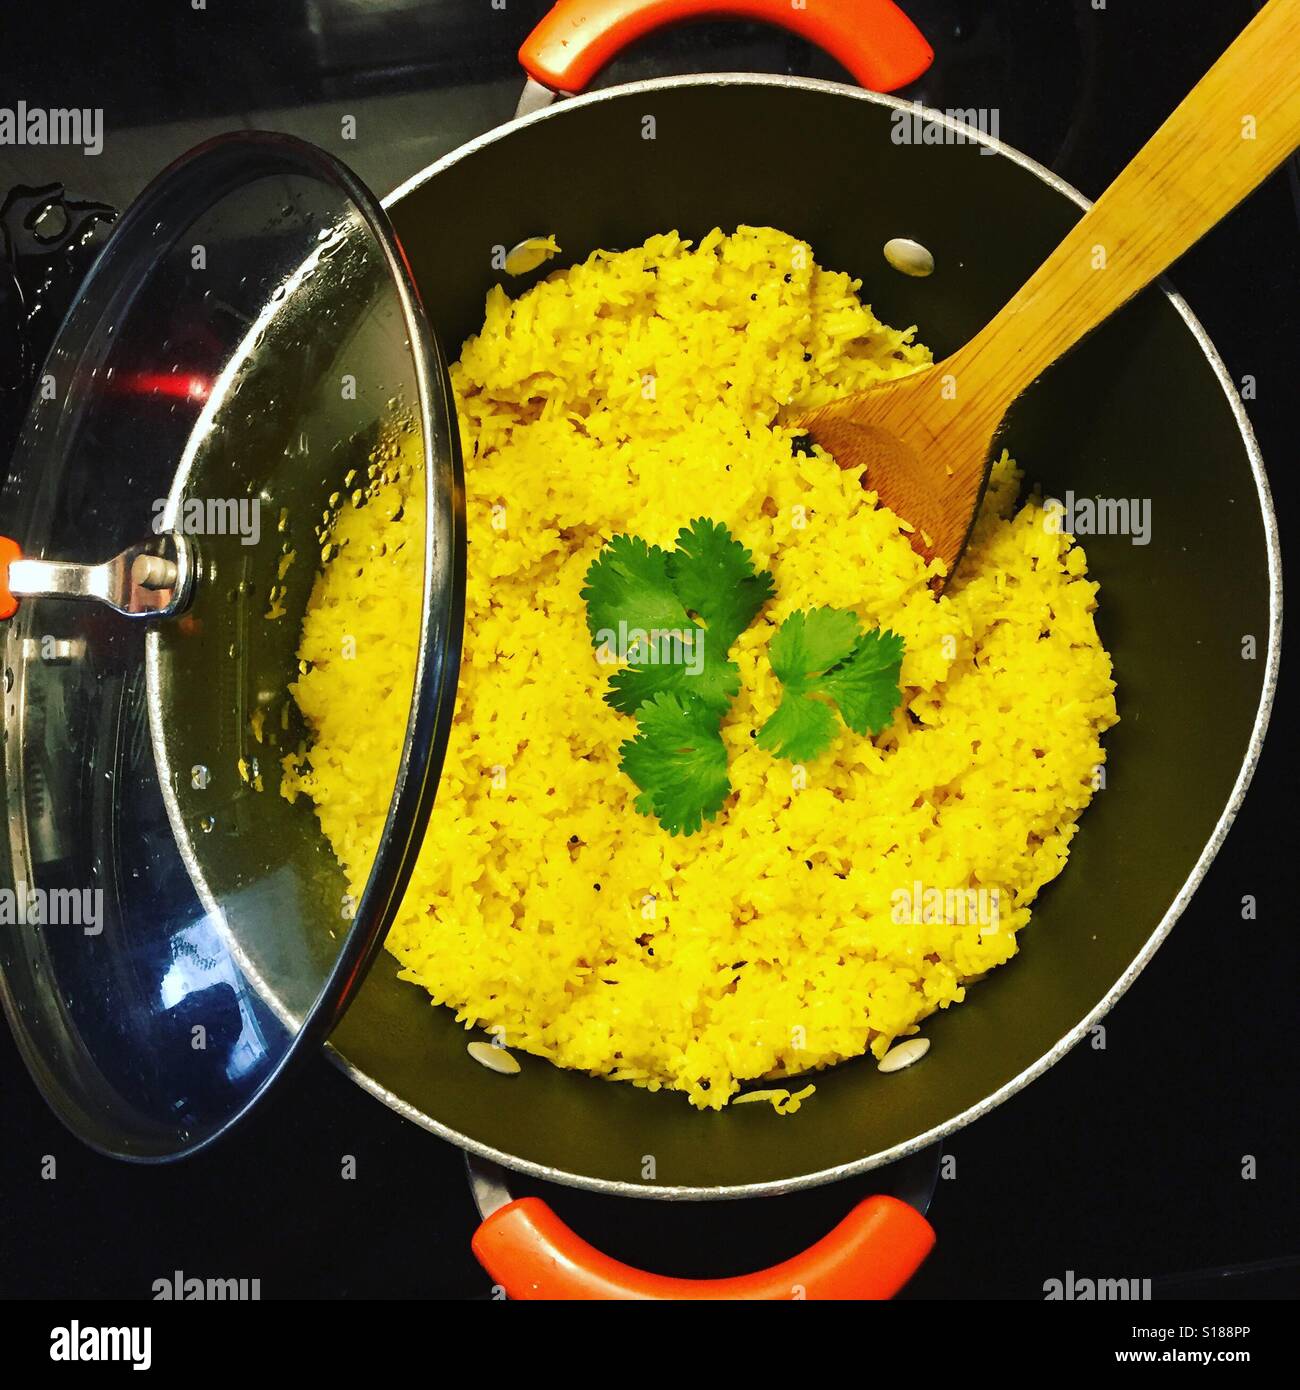 https://c8.alamy.com/comp/S188PP/spanish-rice-in-an-orange-and-black-pot-on-a-black-stove-with-a-little-S188PP.jpg